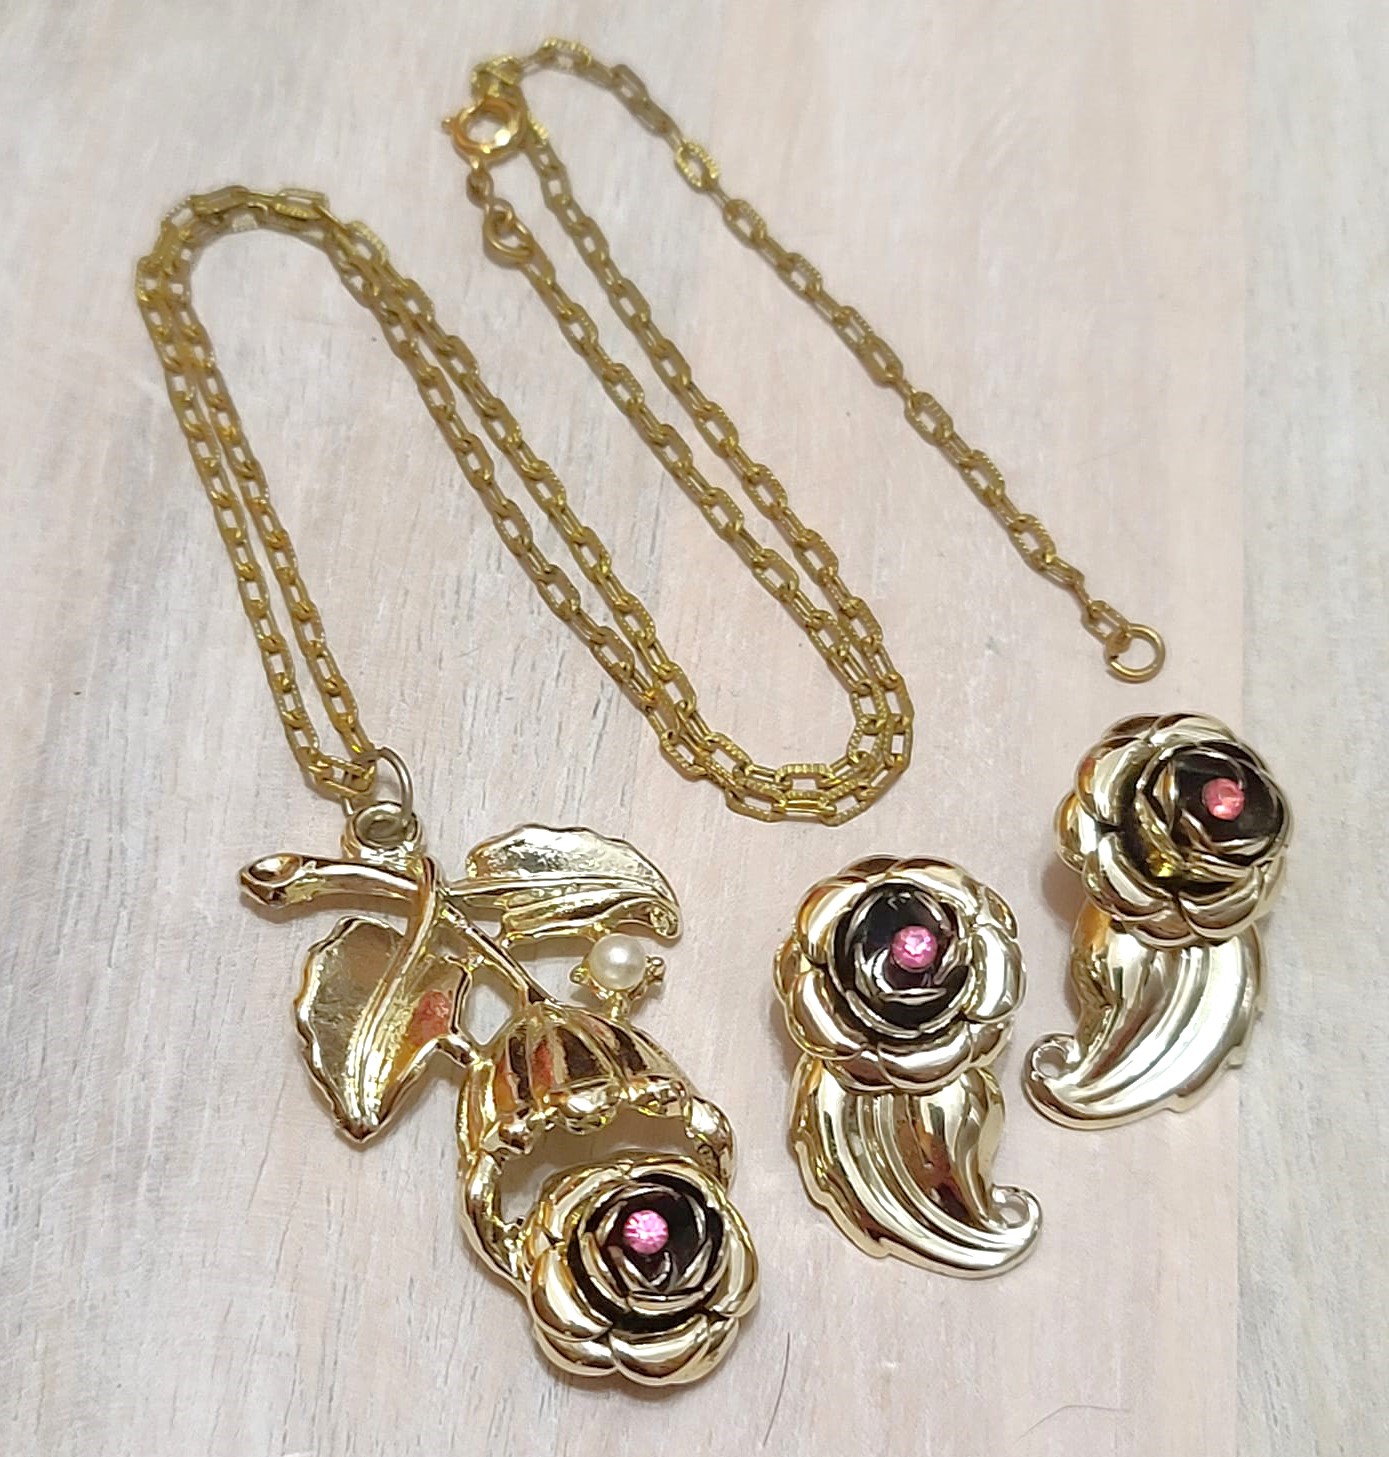 Vintage rose necklace and clip on earrings, rose design with pink rhinestones